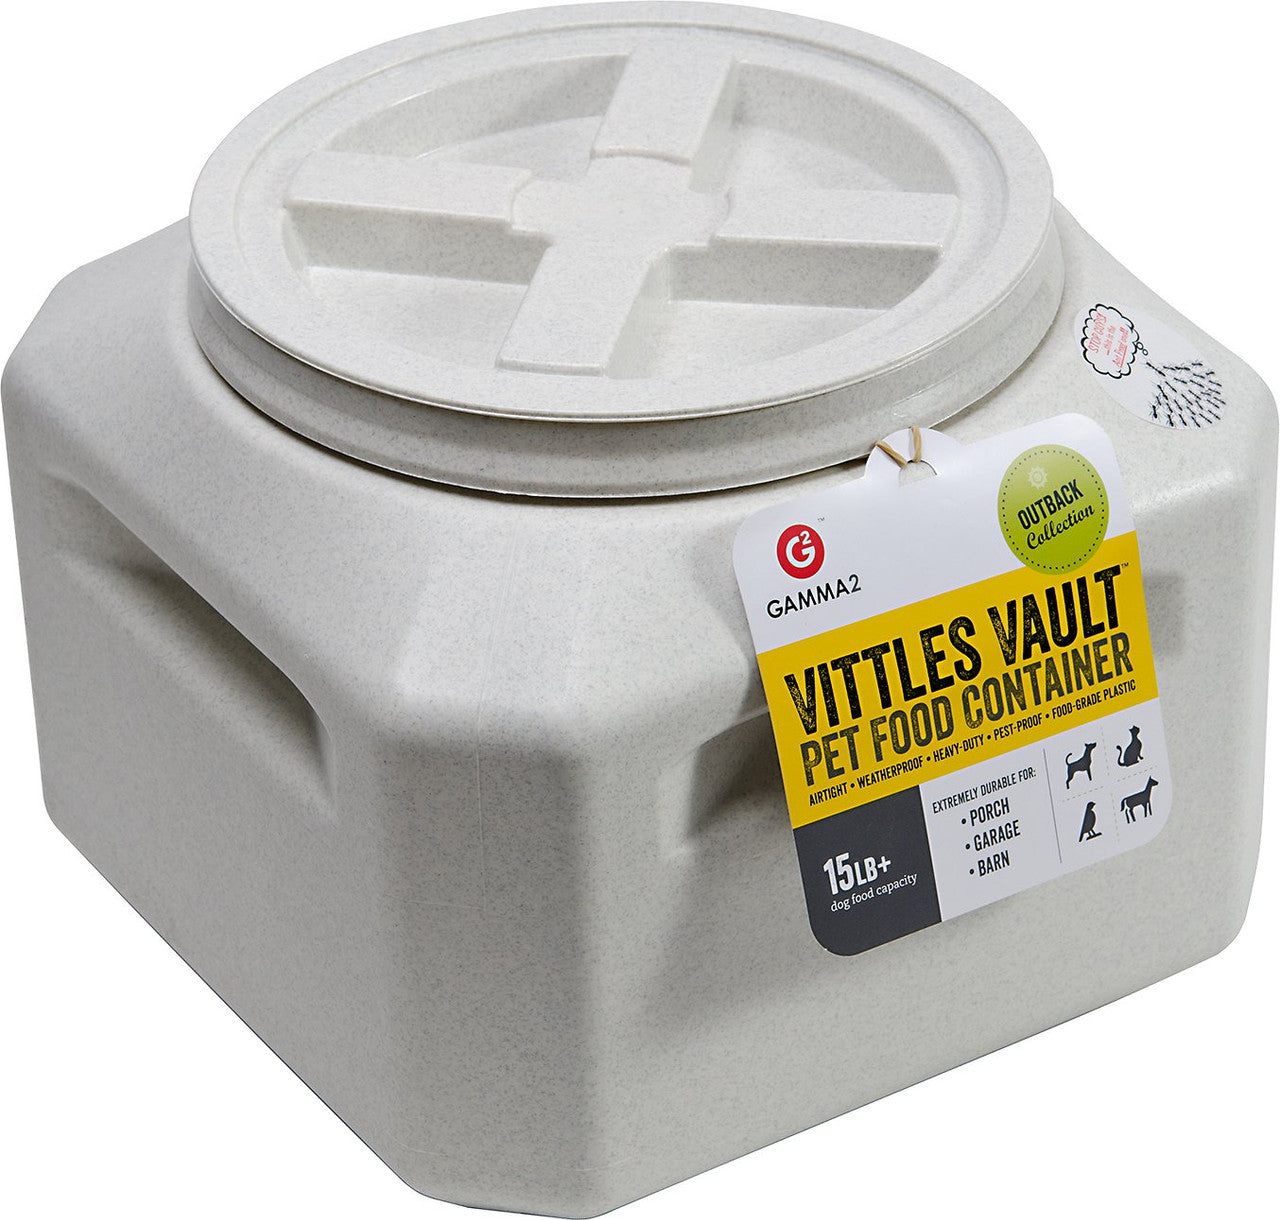 Vittles Vault Gamma Outback Pet Food Container 15lb